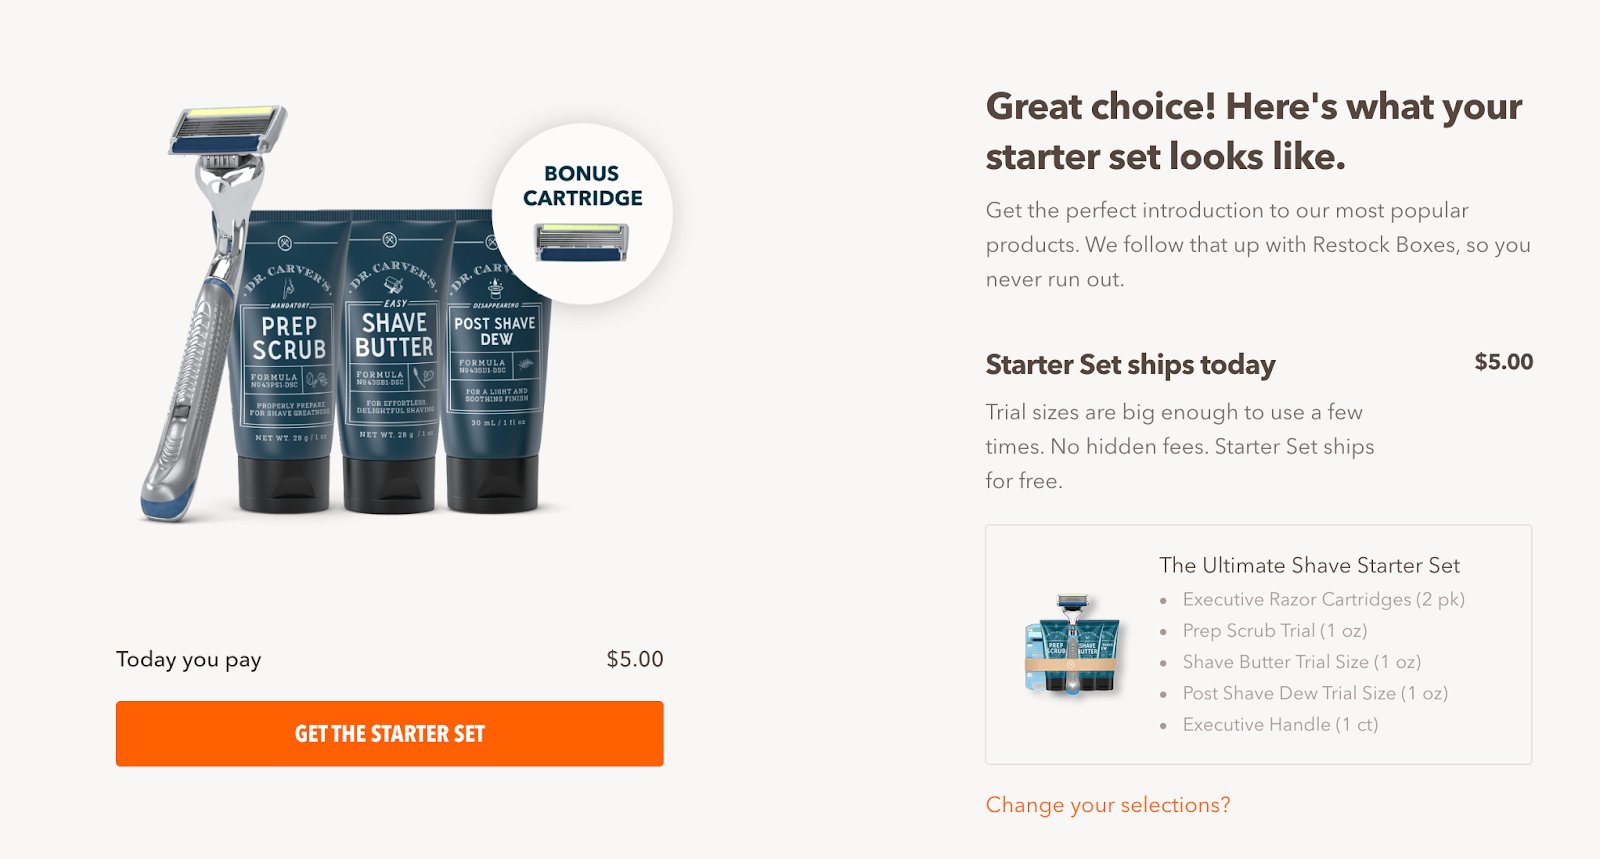 bundled product options available on Dollar Shave Club